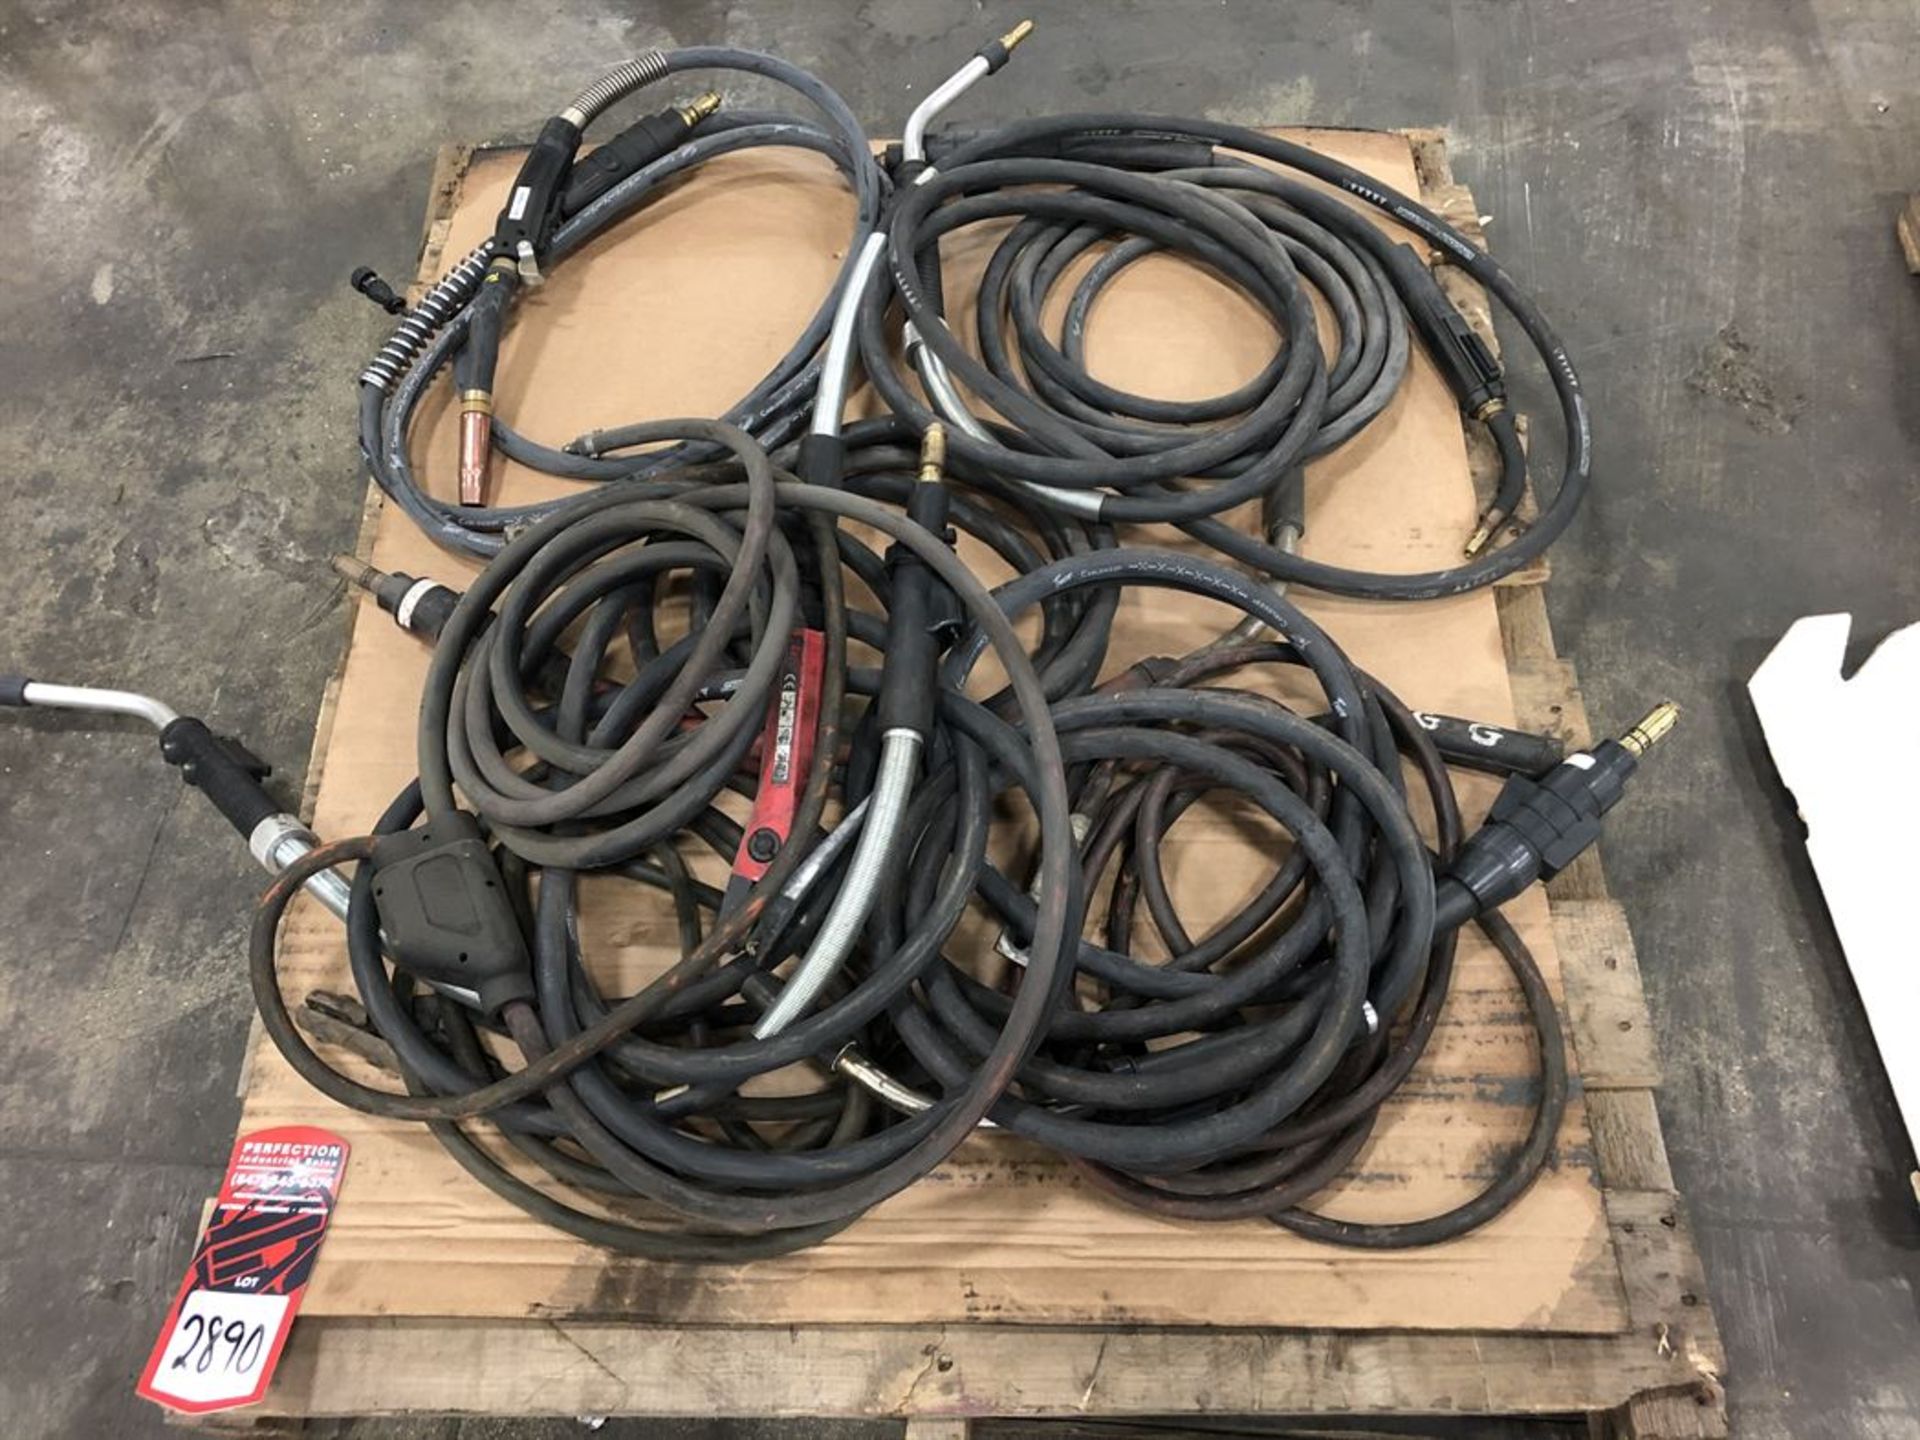 Lot Comprising Assorted MIG Welding Torches, (23K)